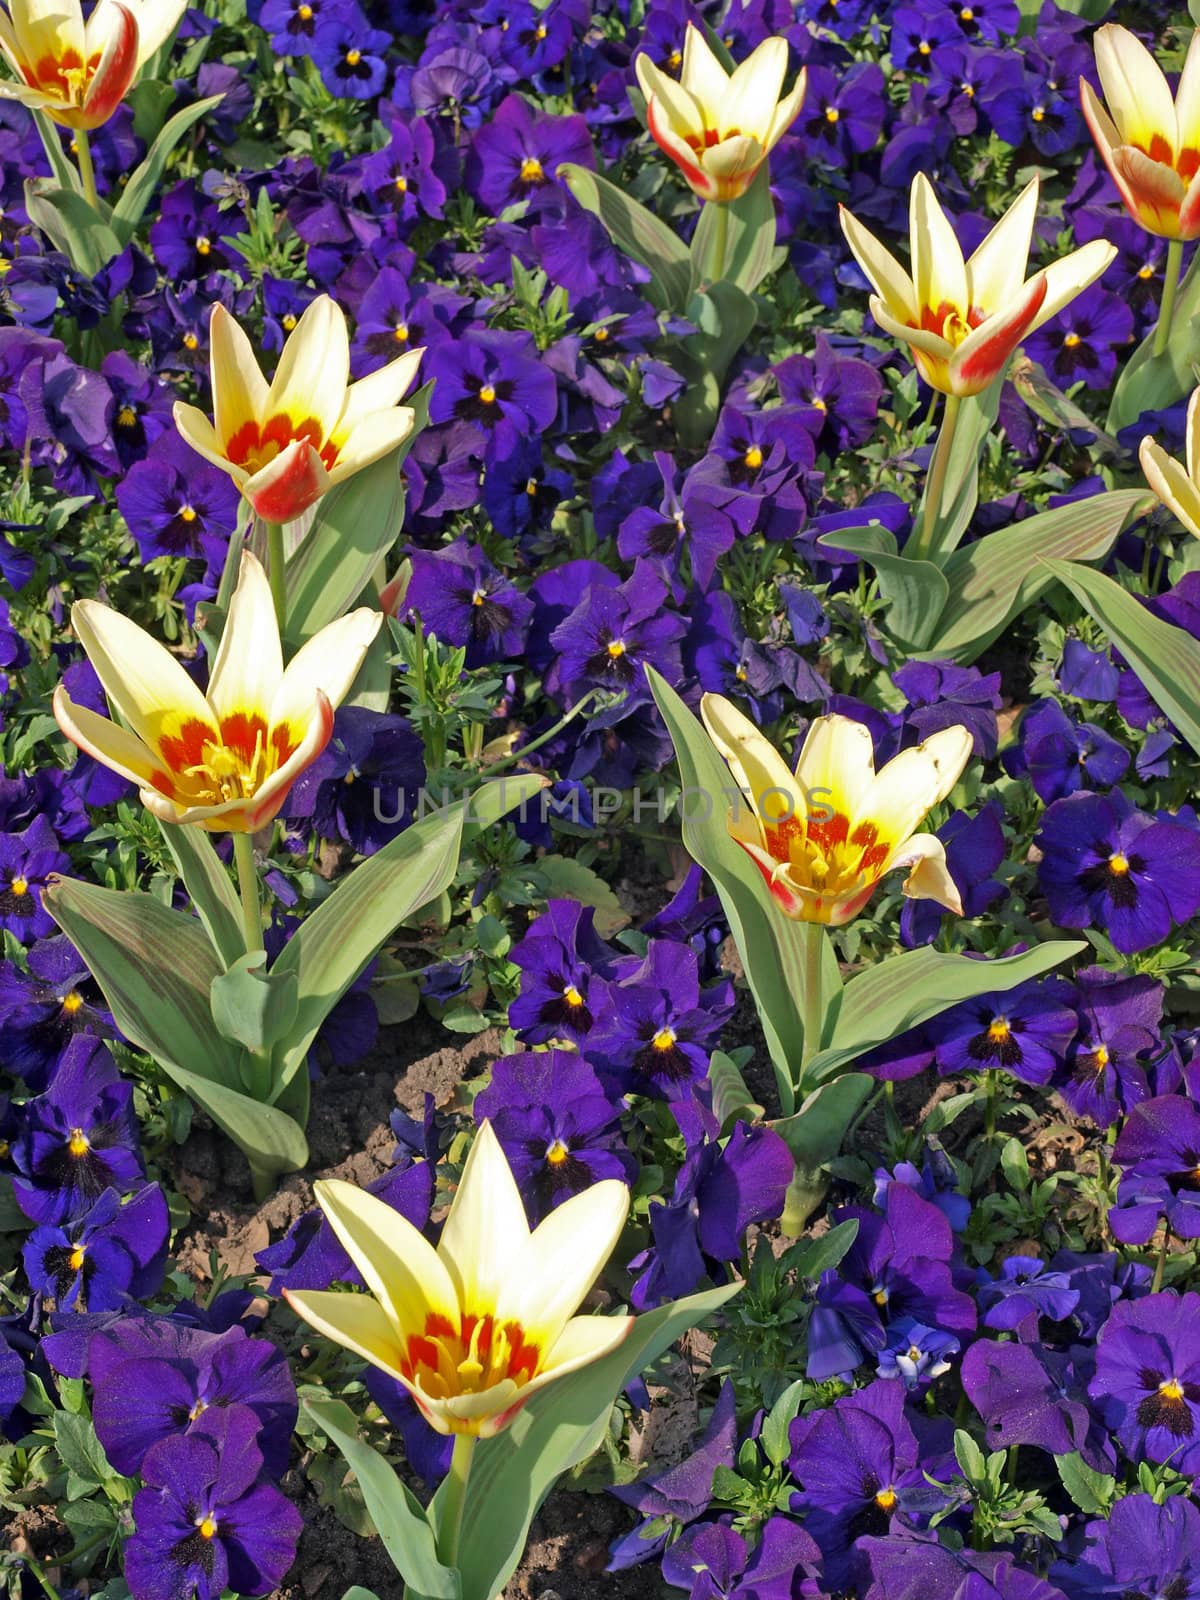 Tulips and pansies in a formal flower bed.